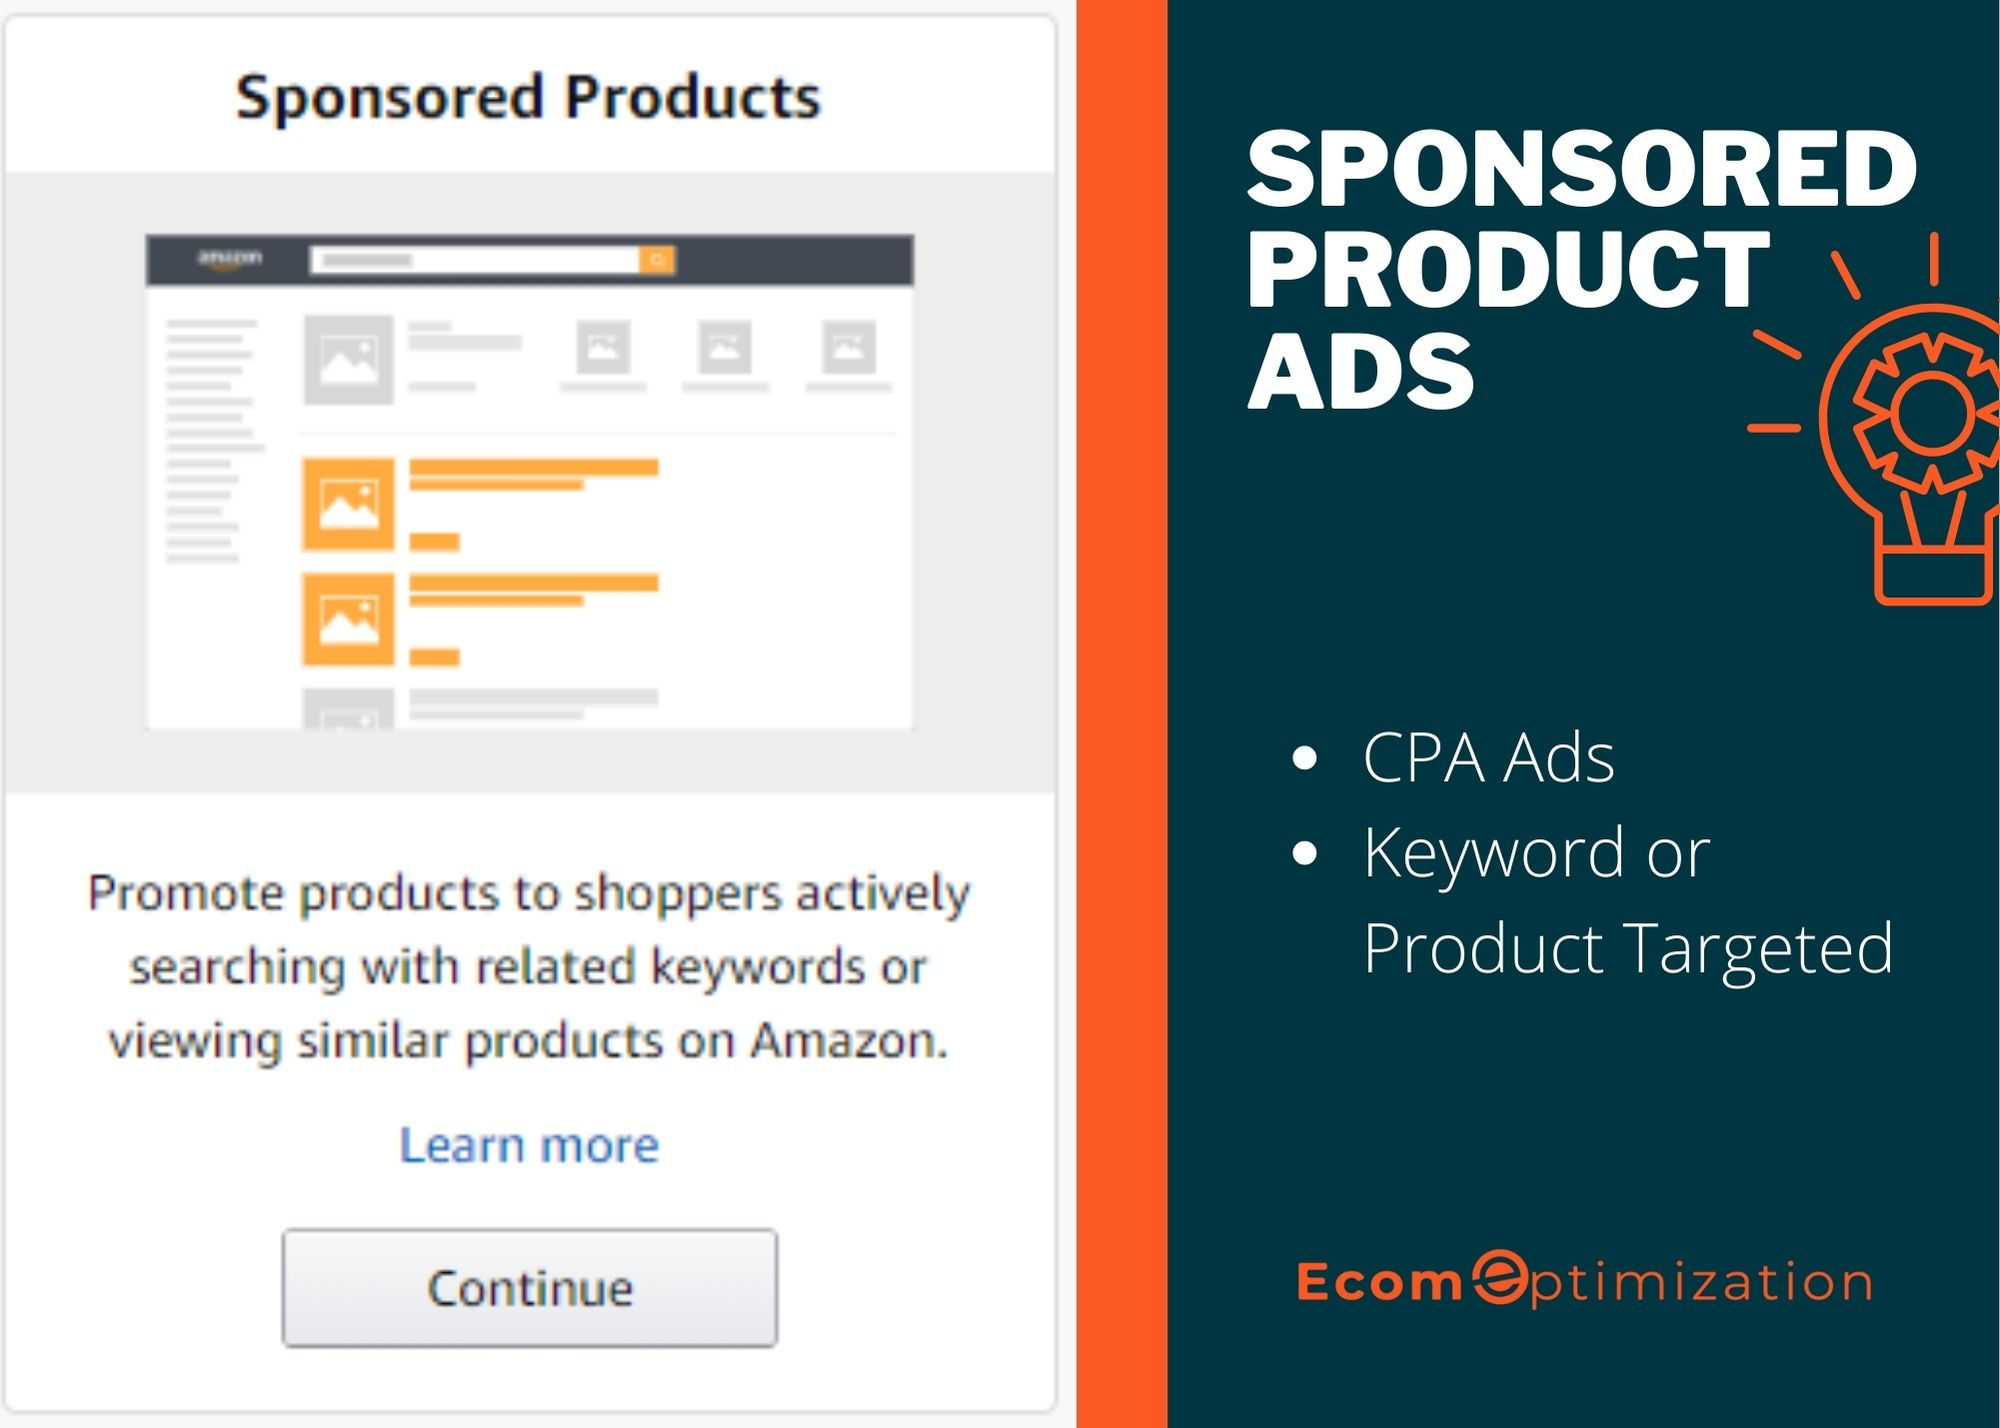 Amazon Sponsored Product Ads can be targeted at keywords or products, give your brand amazing flexibility